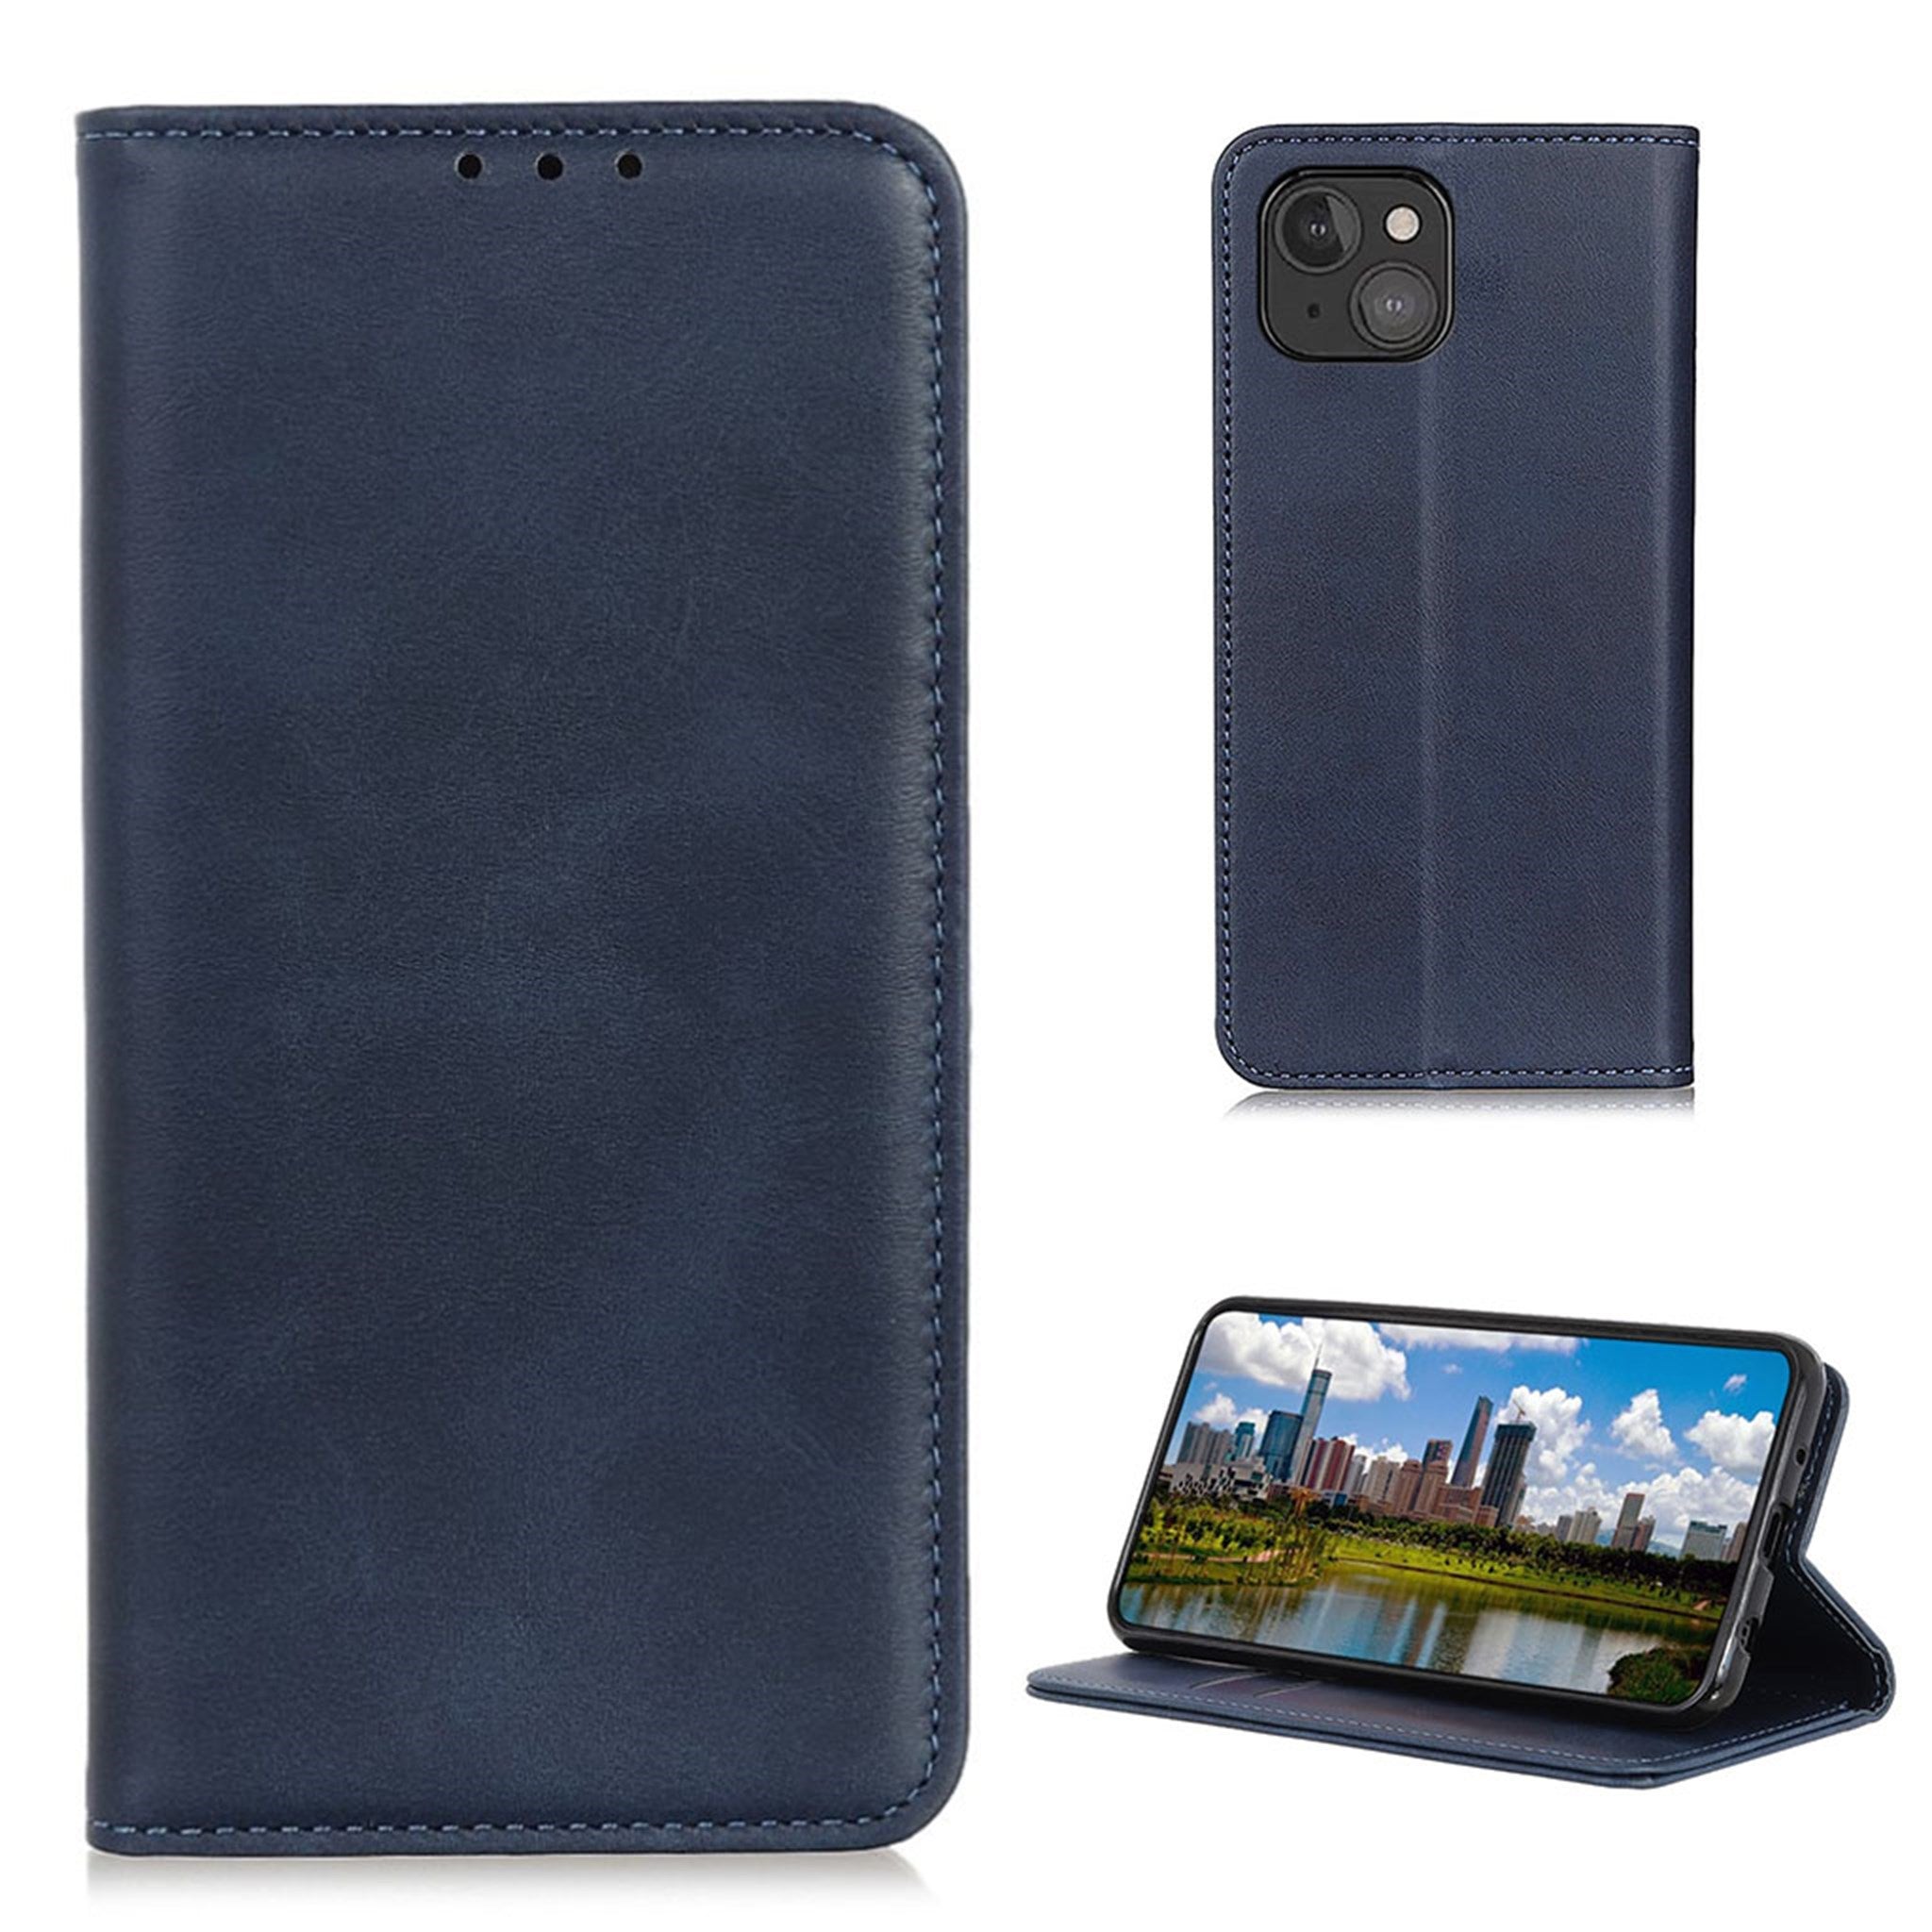 Wallet-style genuine leather flipcase for iPhone 13 Mini - Blue